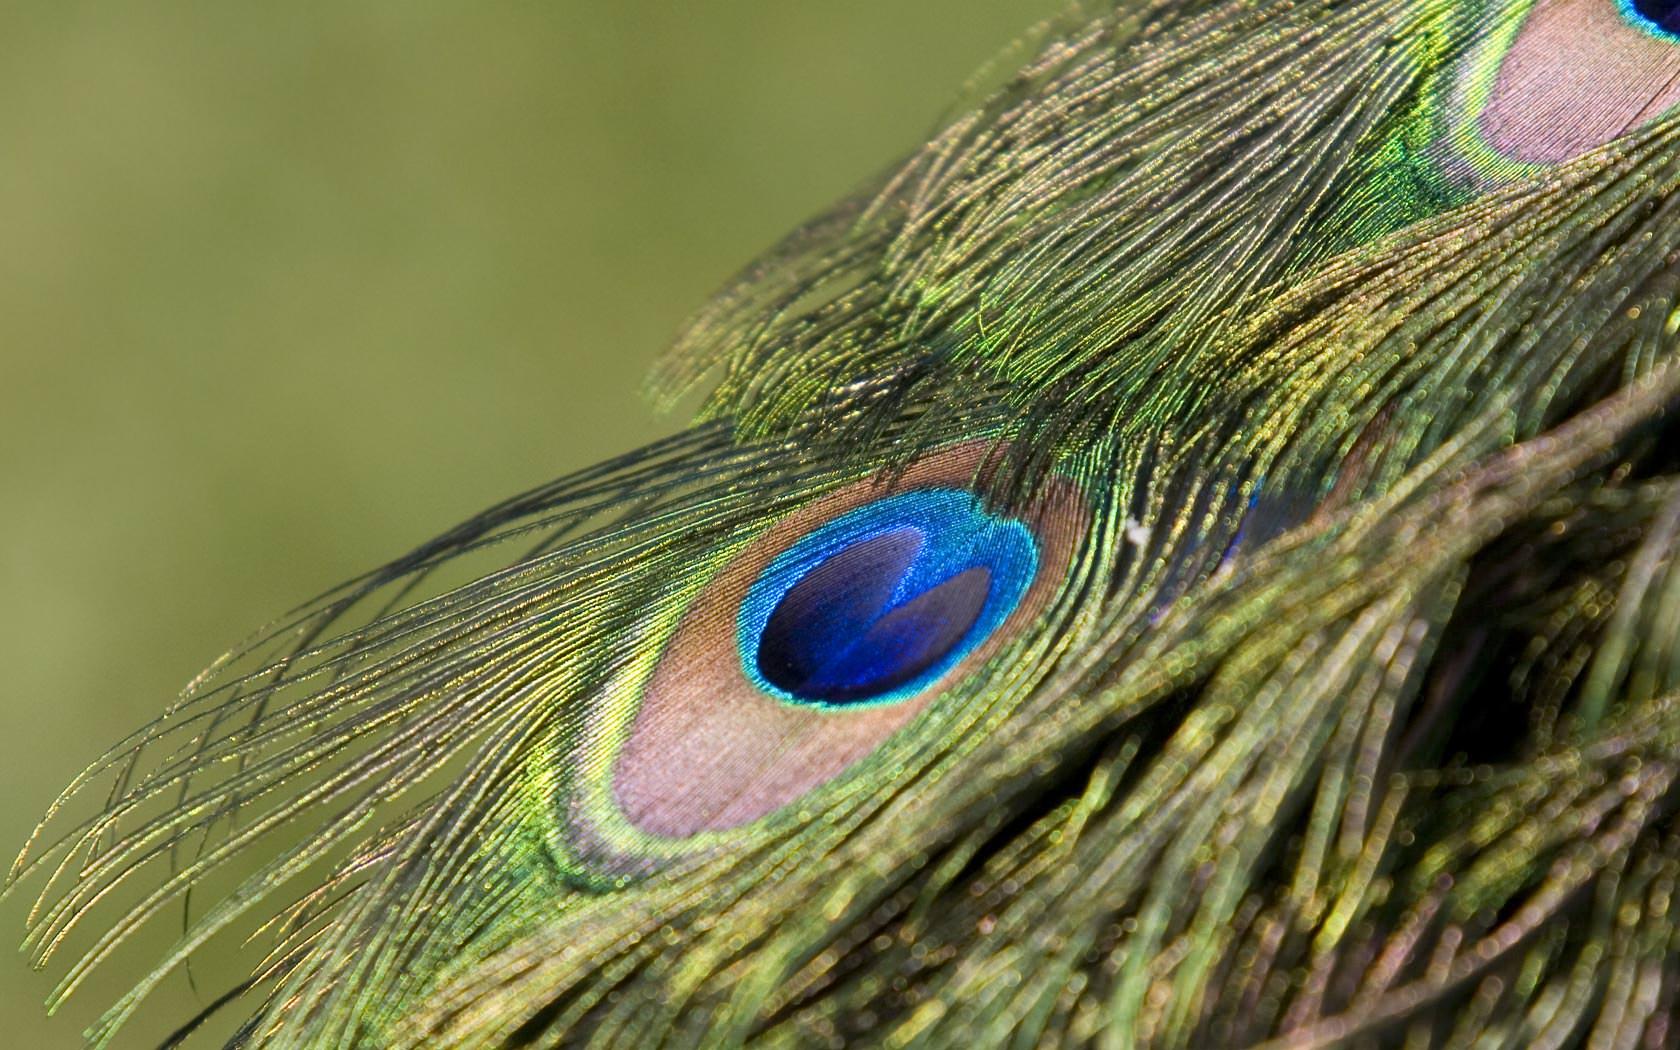 Wallpaper of a Peacock Feathers